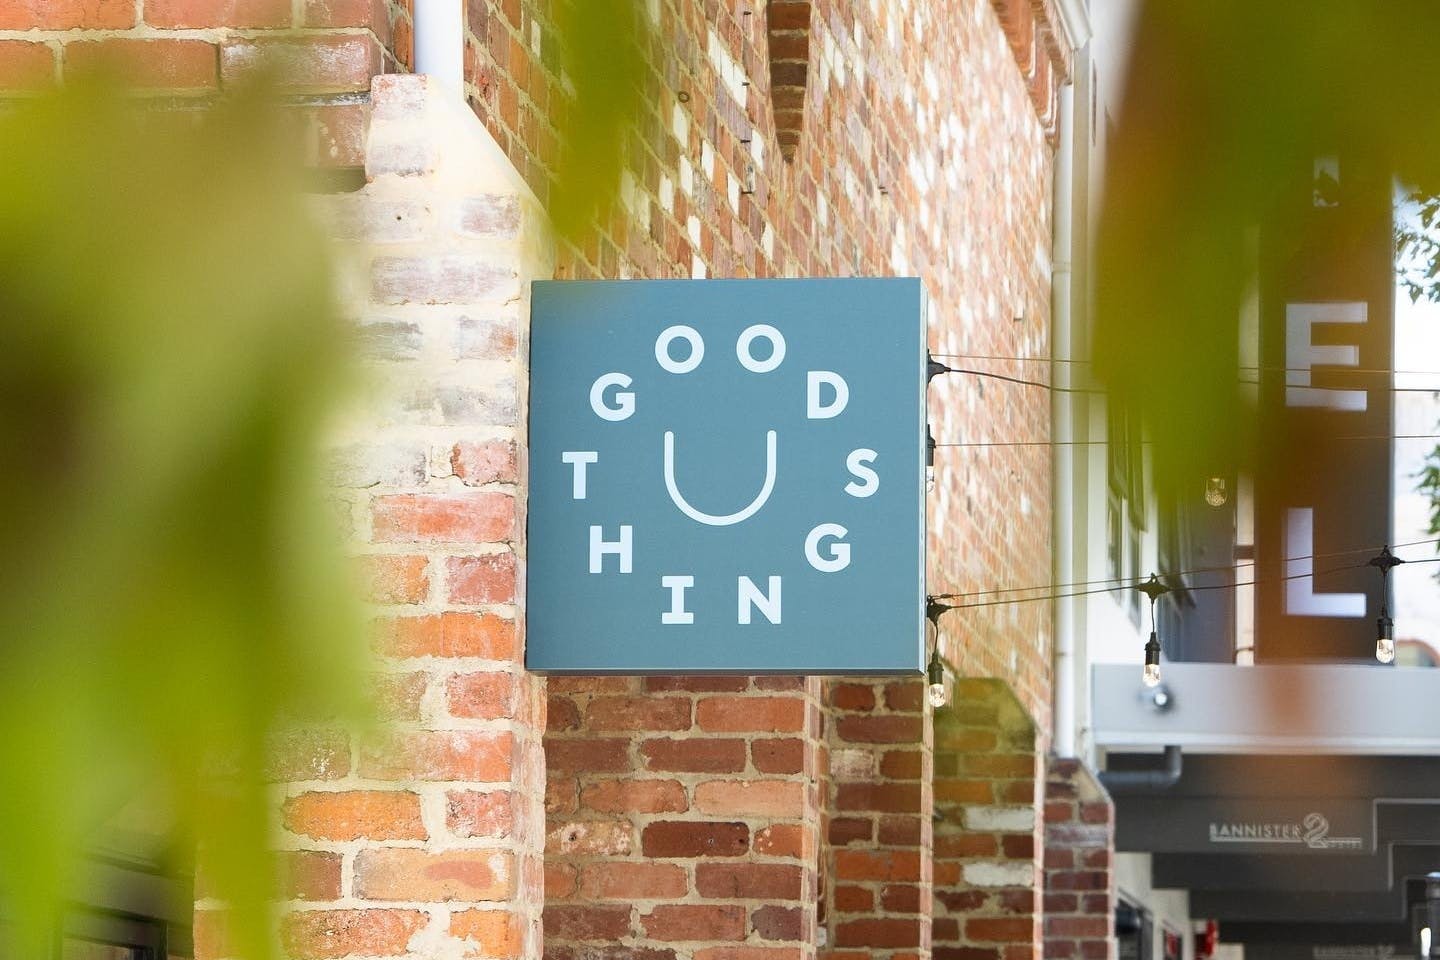 Good Things Opens in Freo